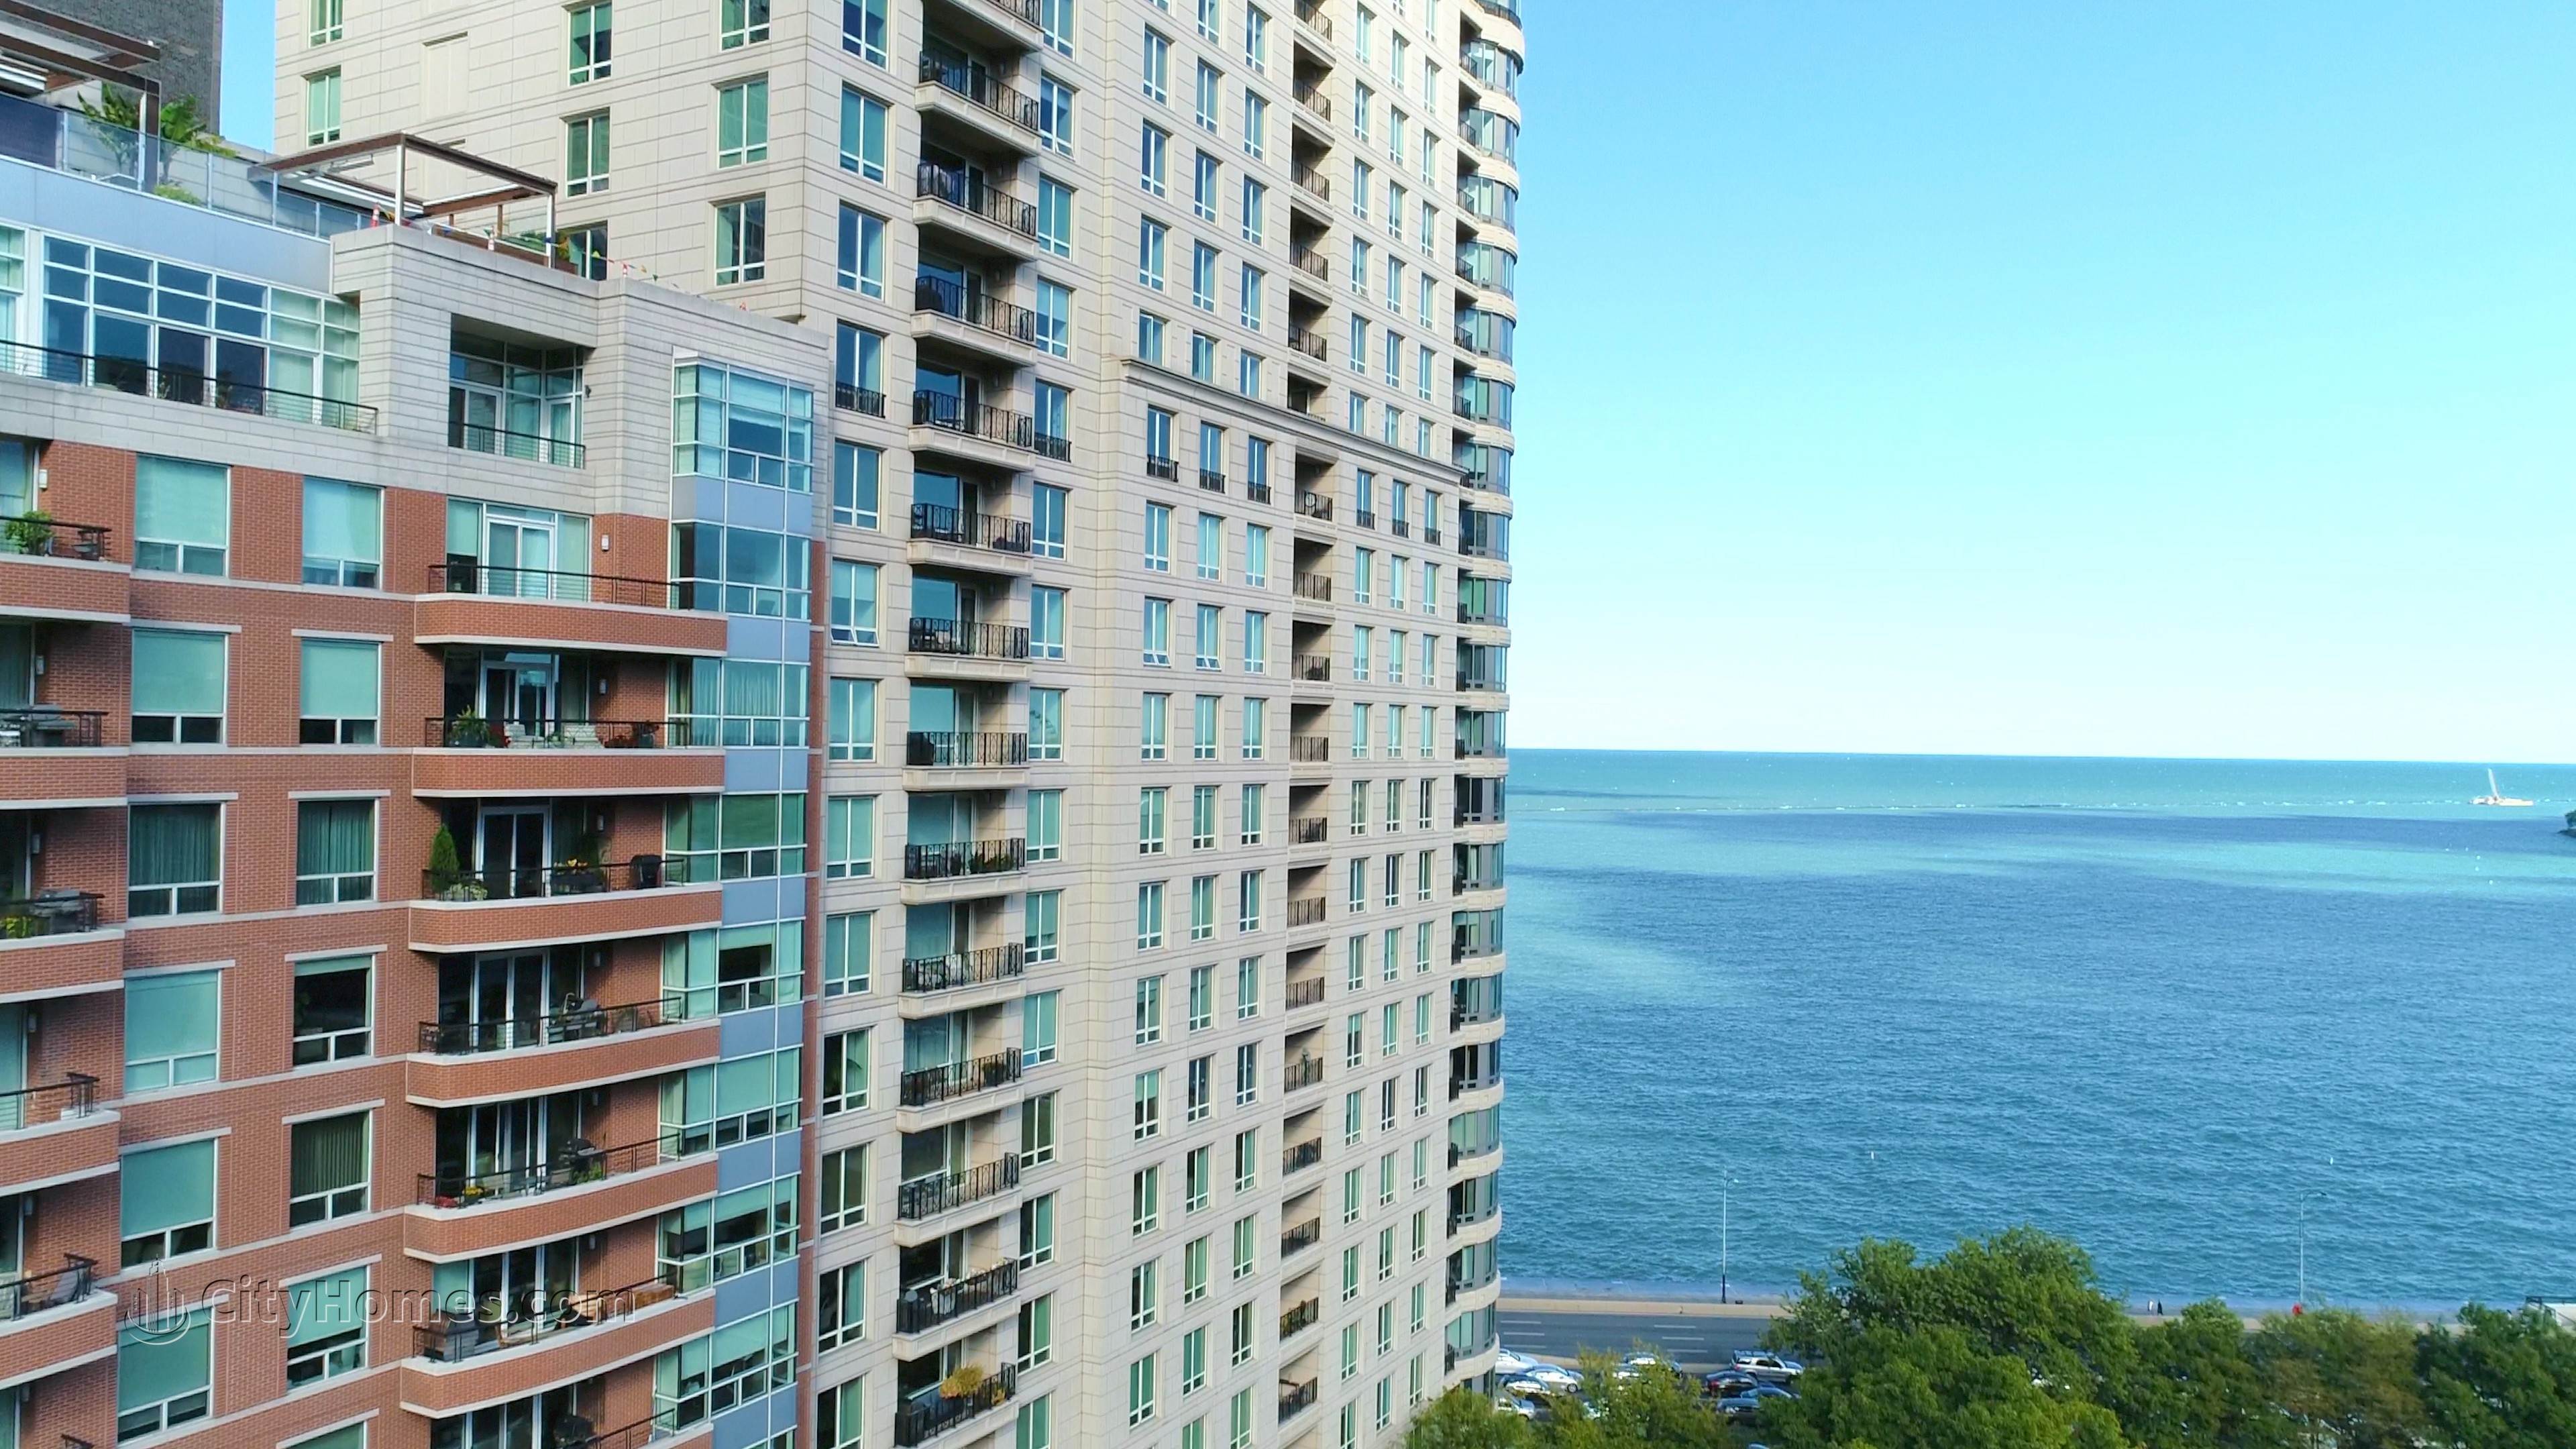 Residences of Lakeshore Park κτίριο σε 840 N Lake Shore Dr, Central Chicago, Σικάγο, IL 60611